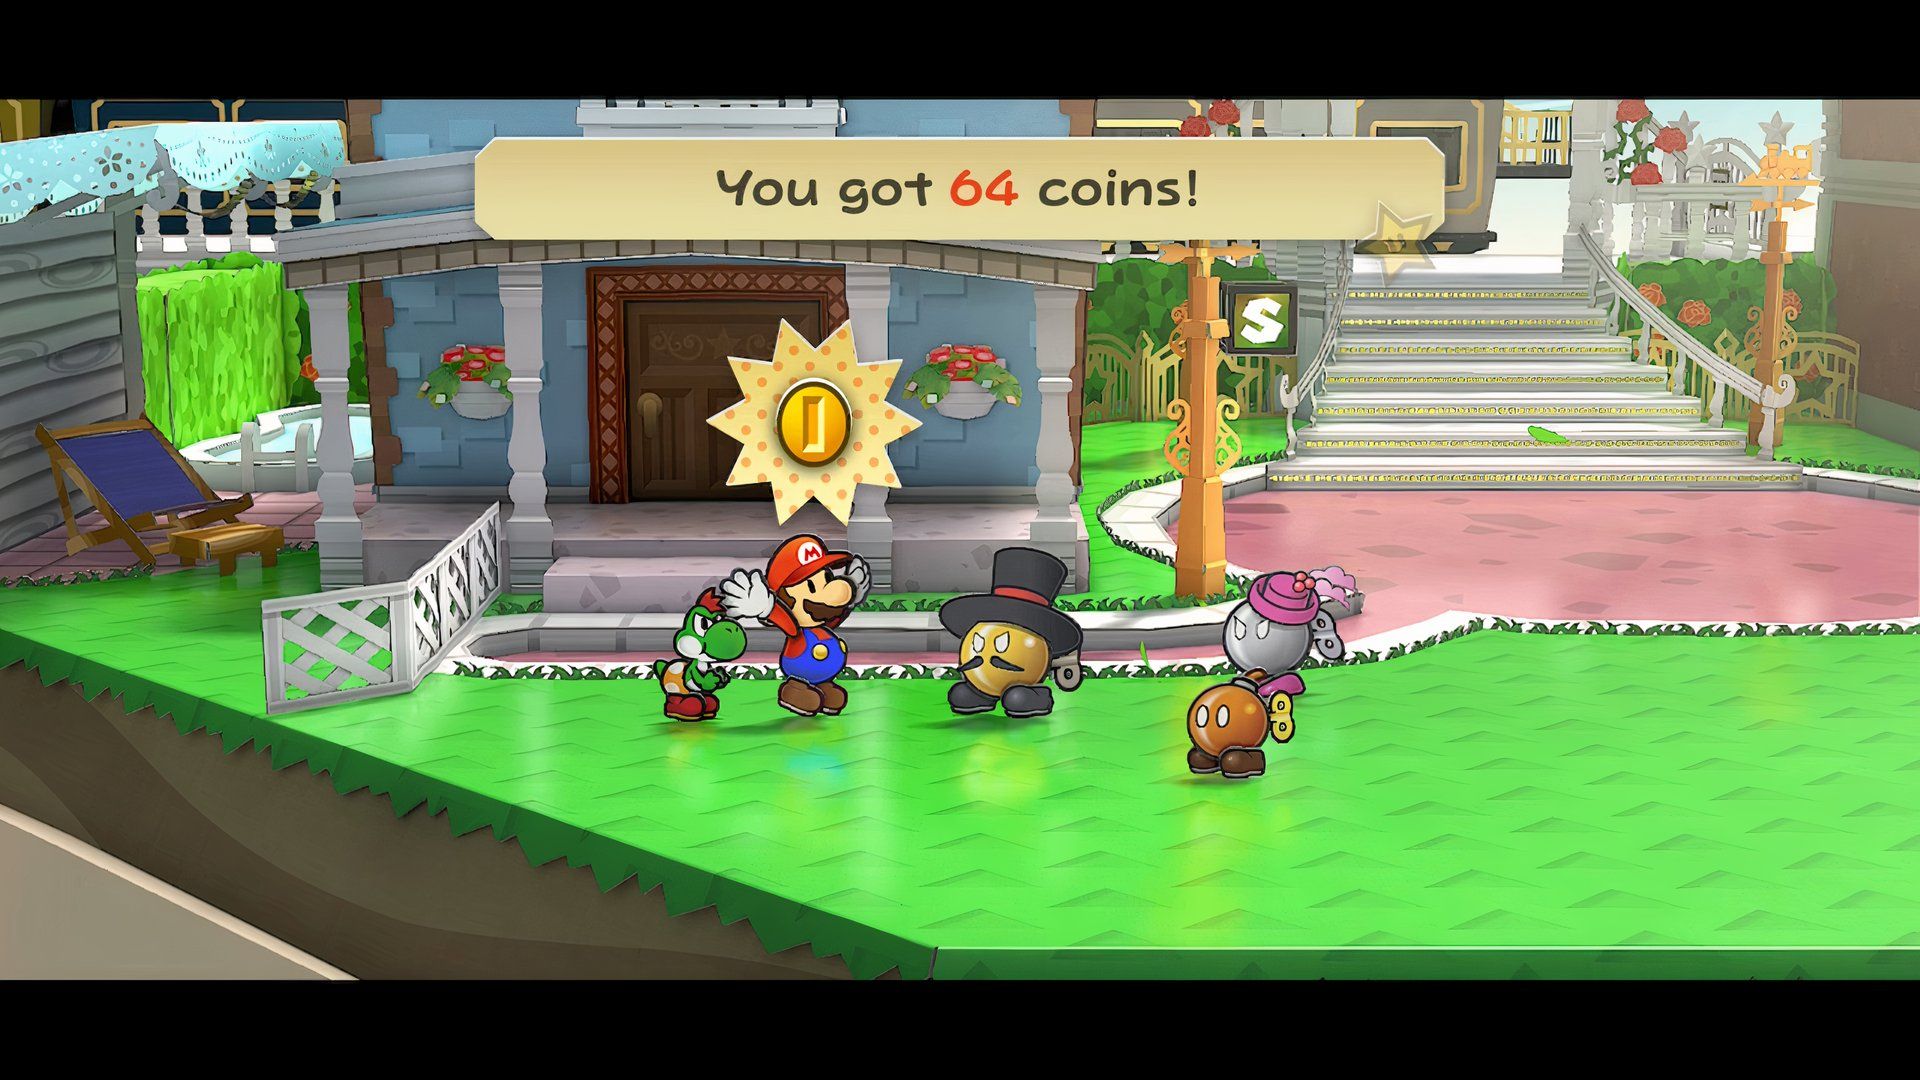 Paper Mario: The Thousand-Year Door - Goldbob's Trouble Center Delivery to General White, Reward